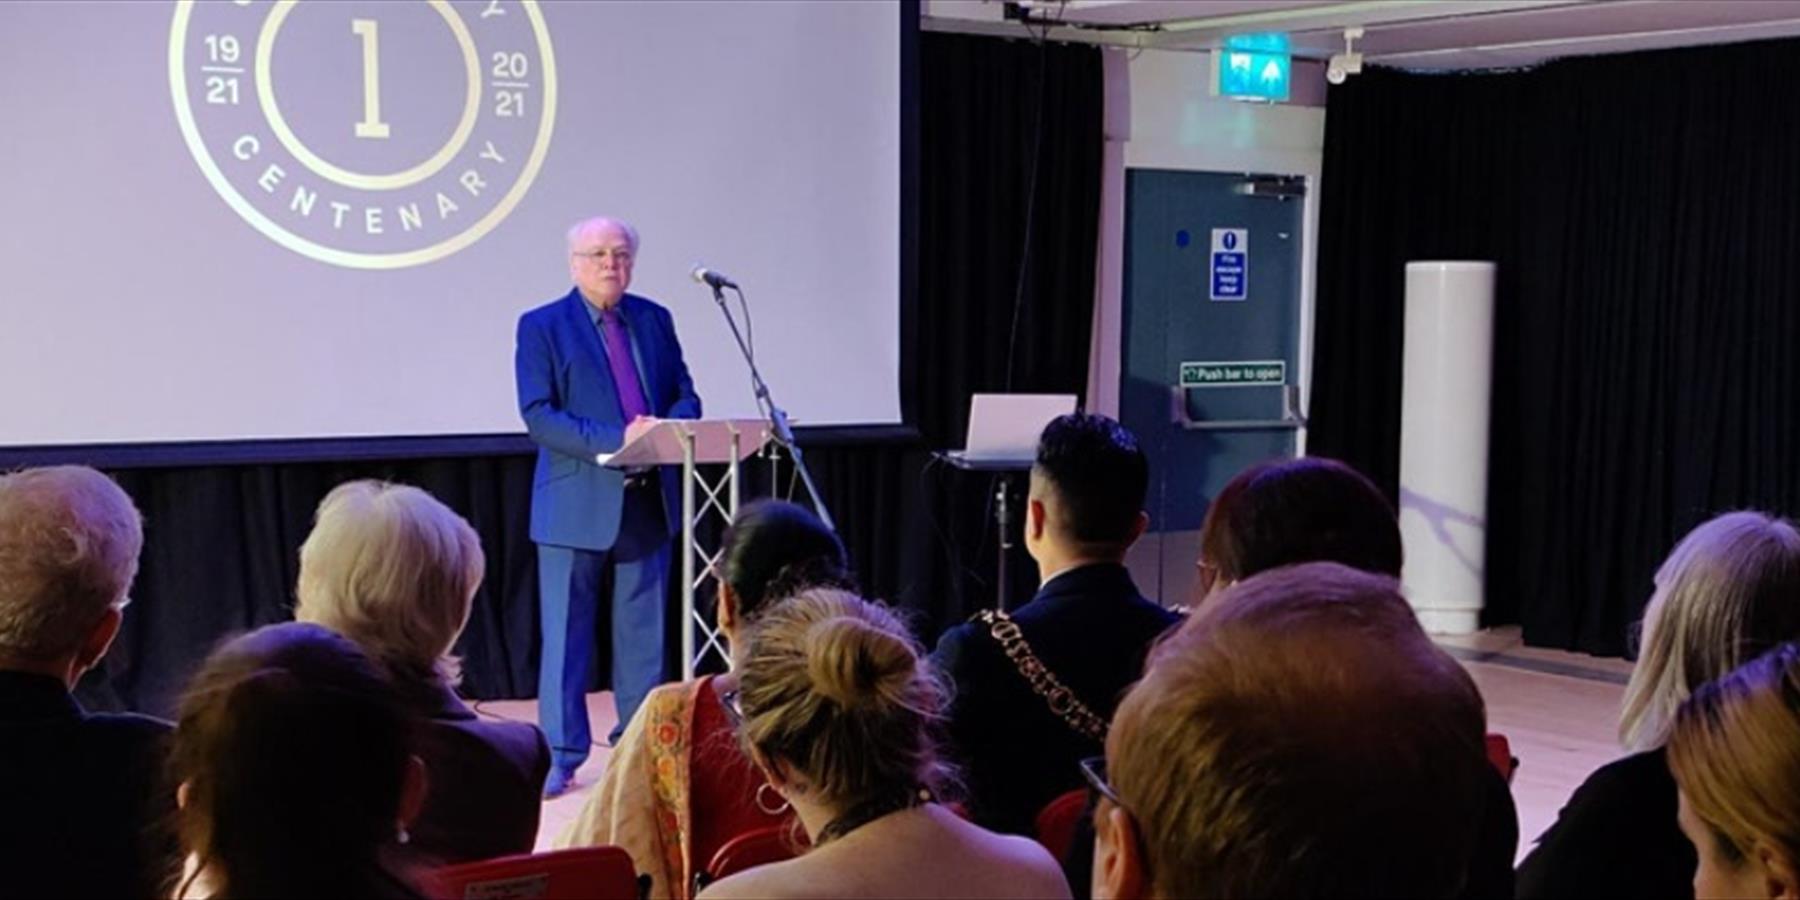 Michael Attenborough speaking at an event